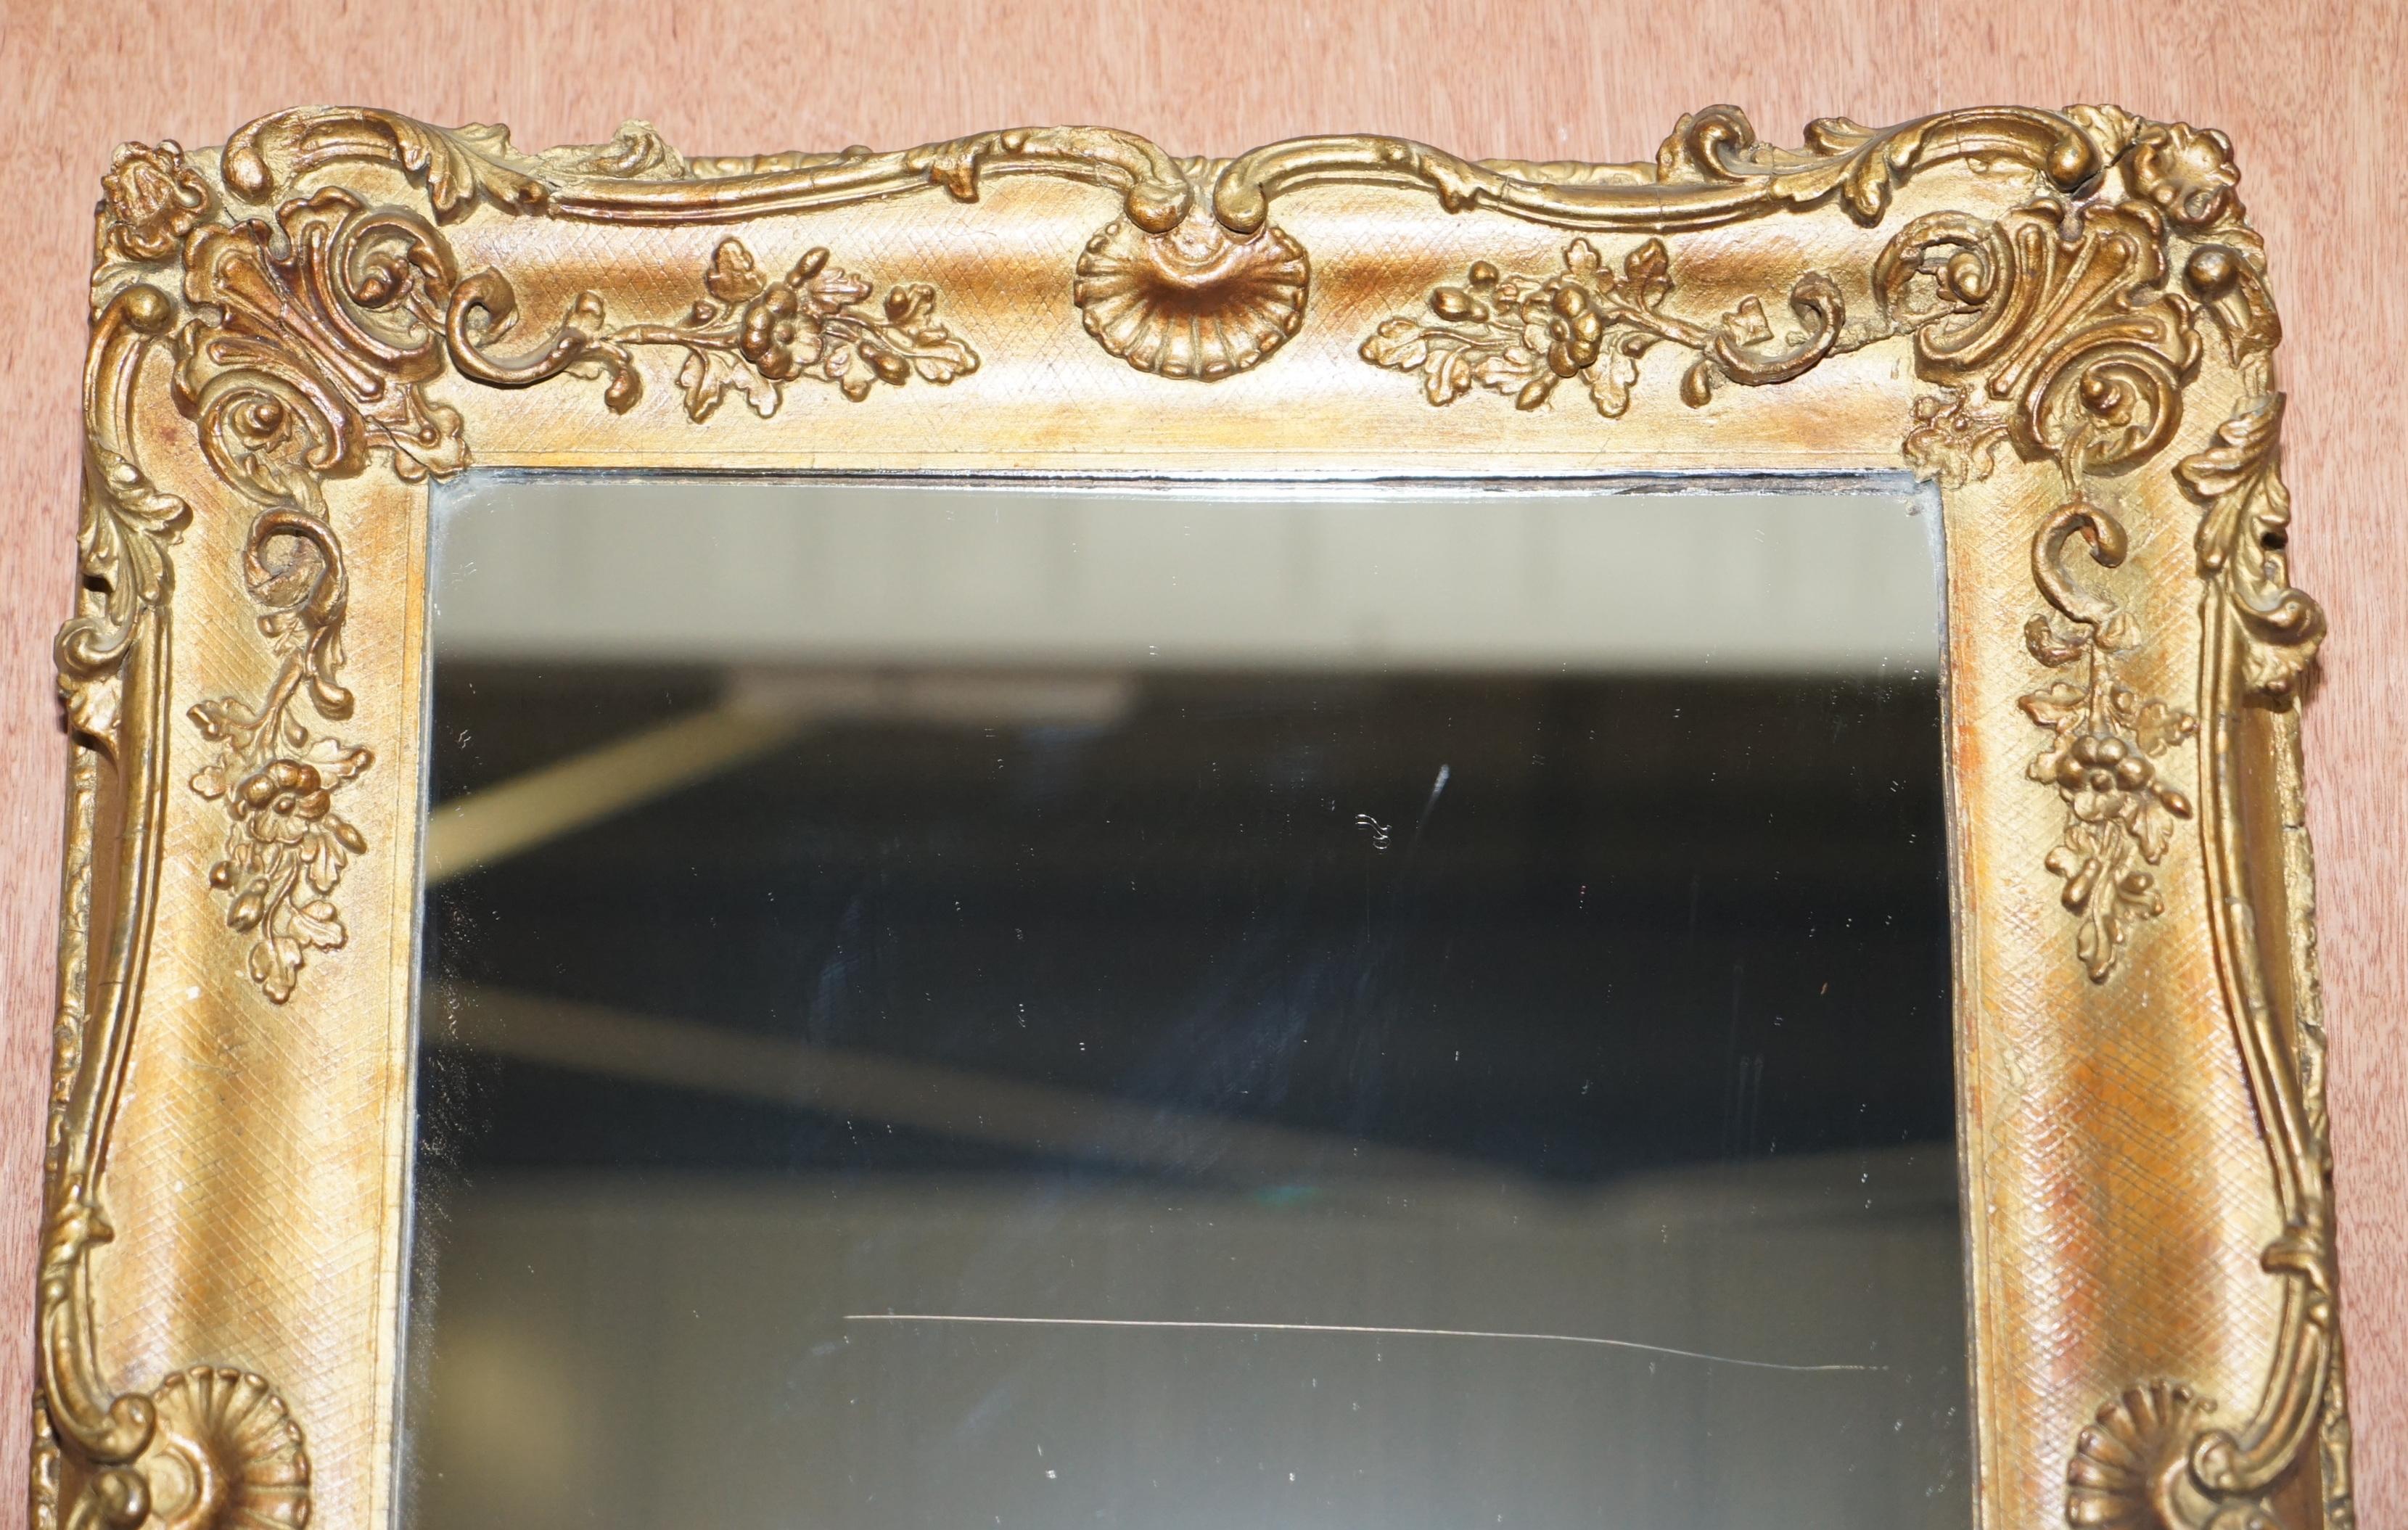 Hand-Crafted Lovely circa 1880-1900 French Giltwood Wall Mirror with Ornately Carved Frame For Sale